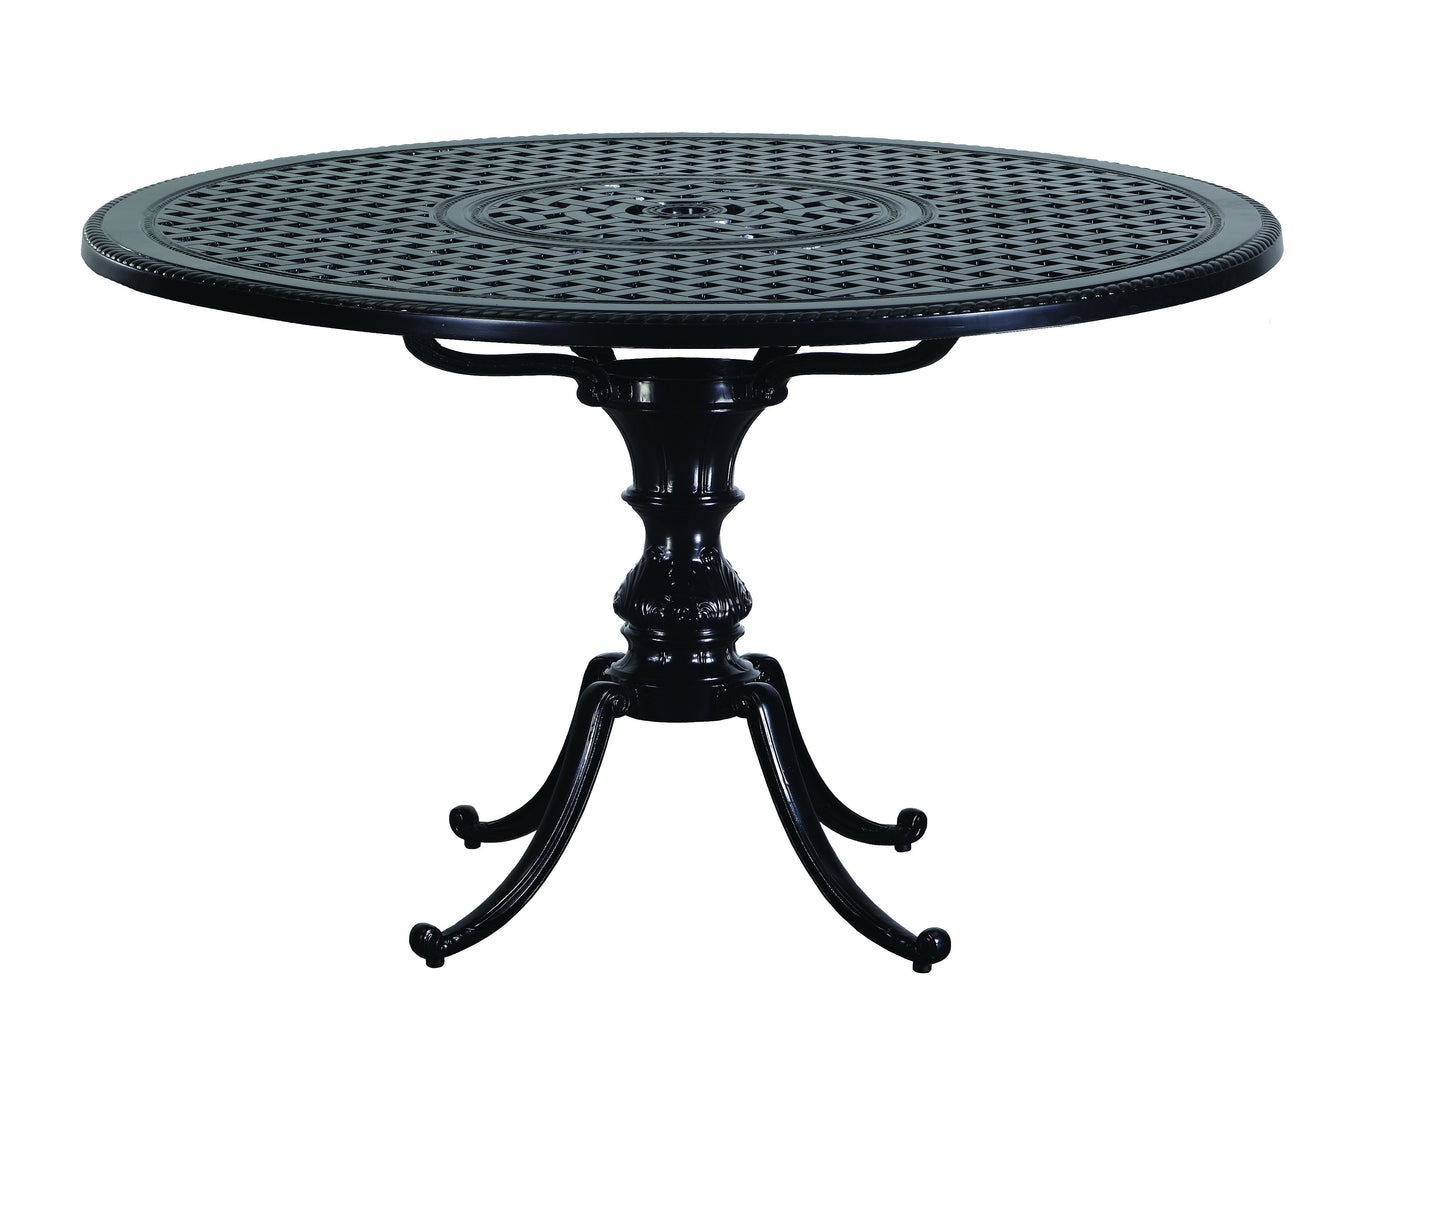 Click to View all Grand Terrace Tables & Accessories